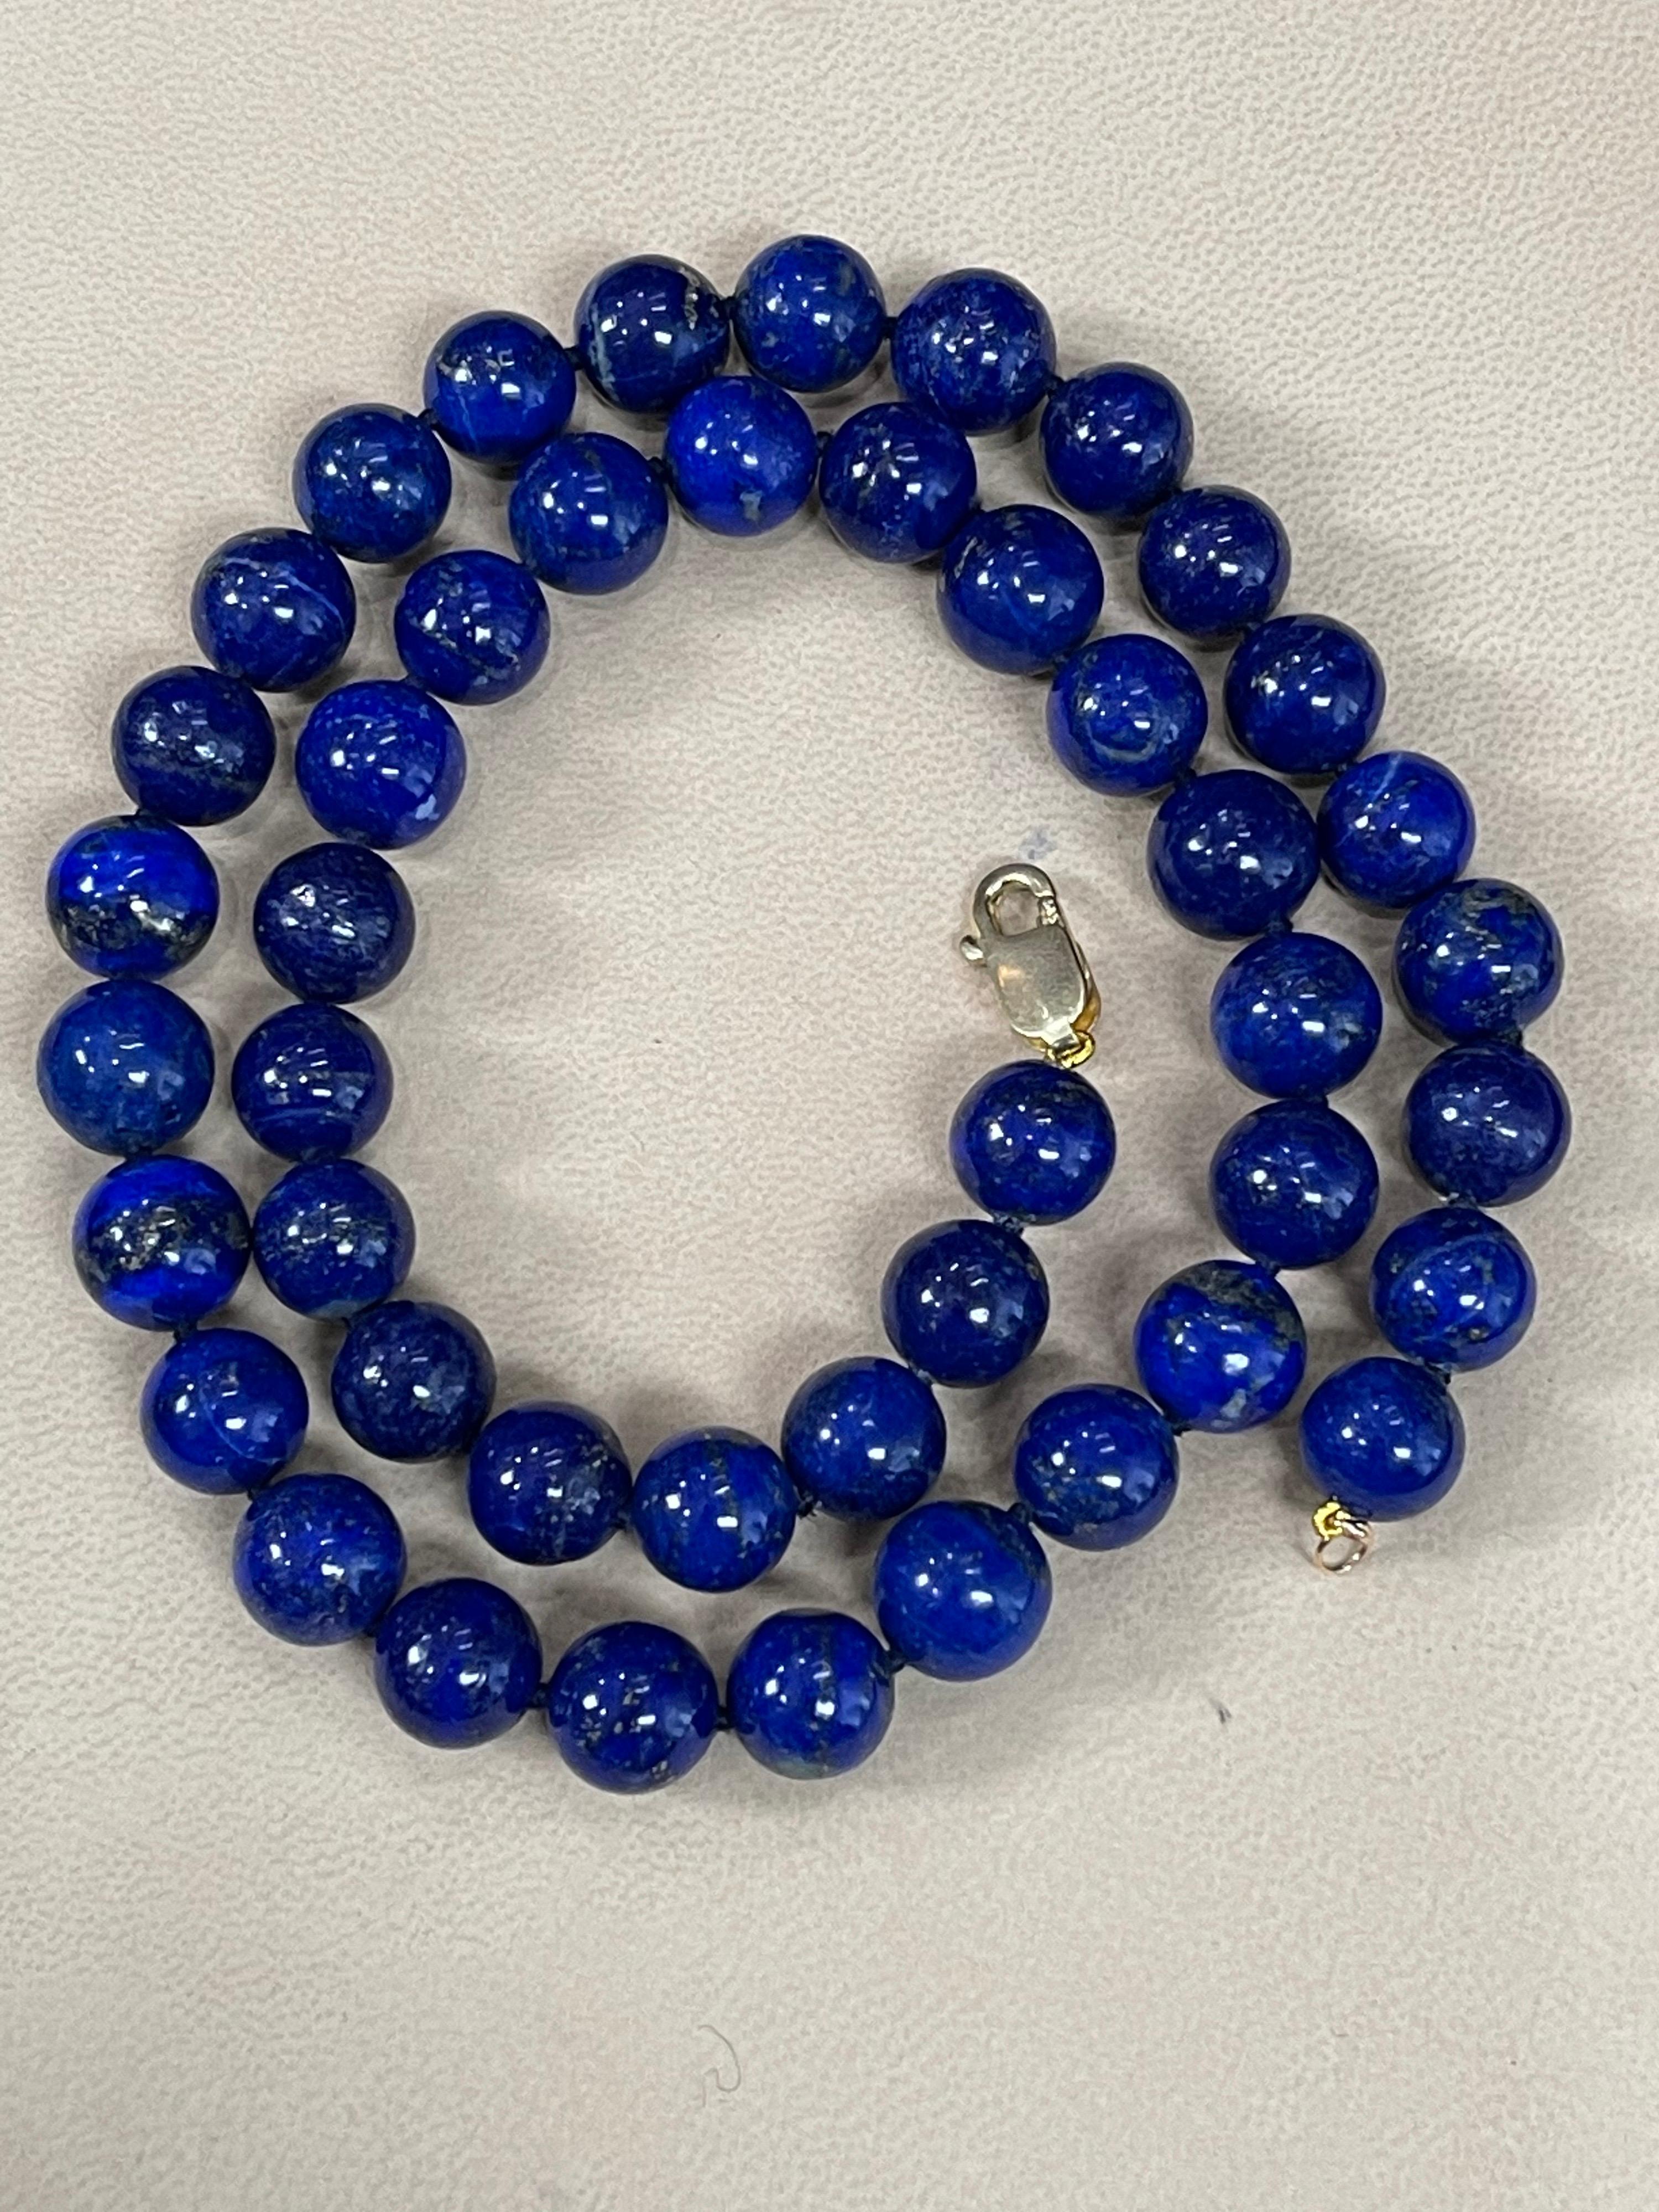 Vintage Lapis Lazuli Single Strand Necklace with 14 Karat Yellow Gold Lobster For Sale 4